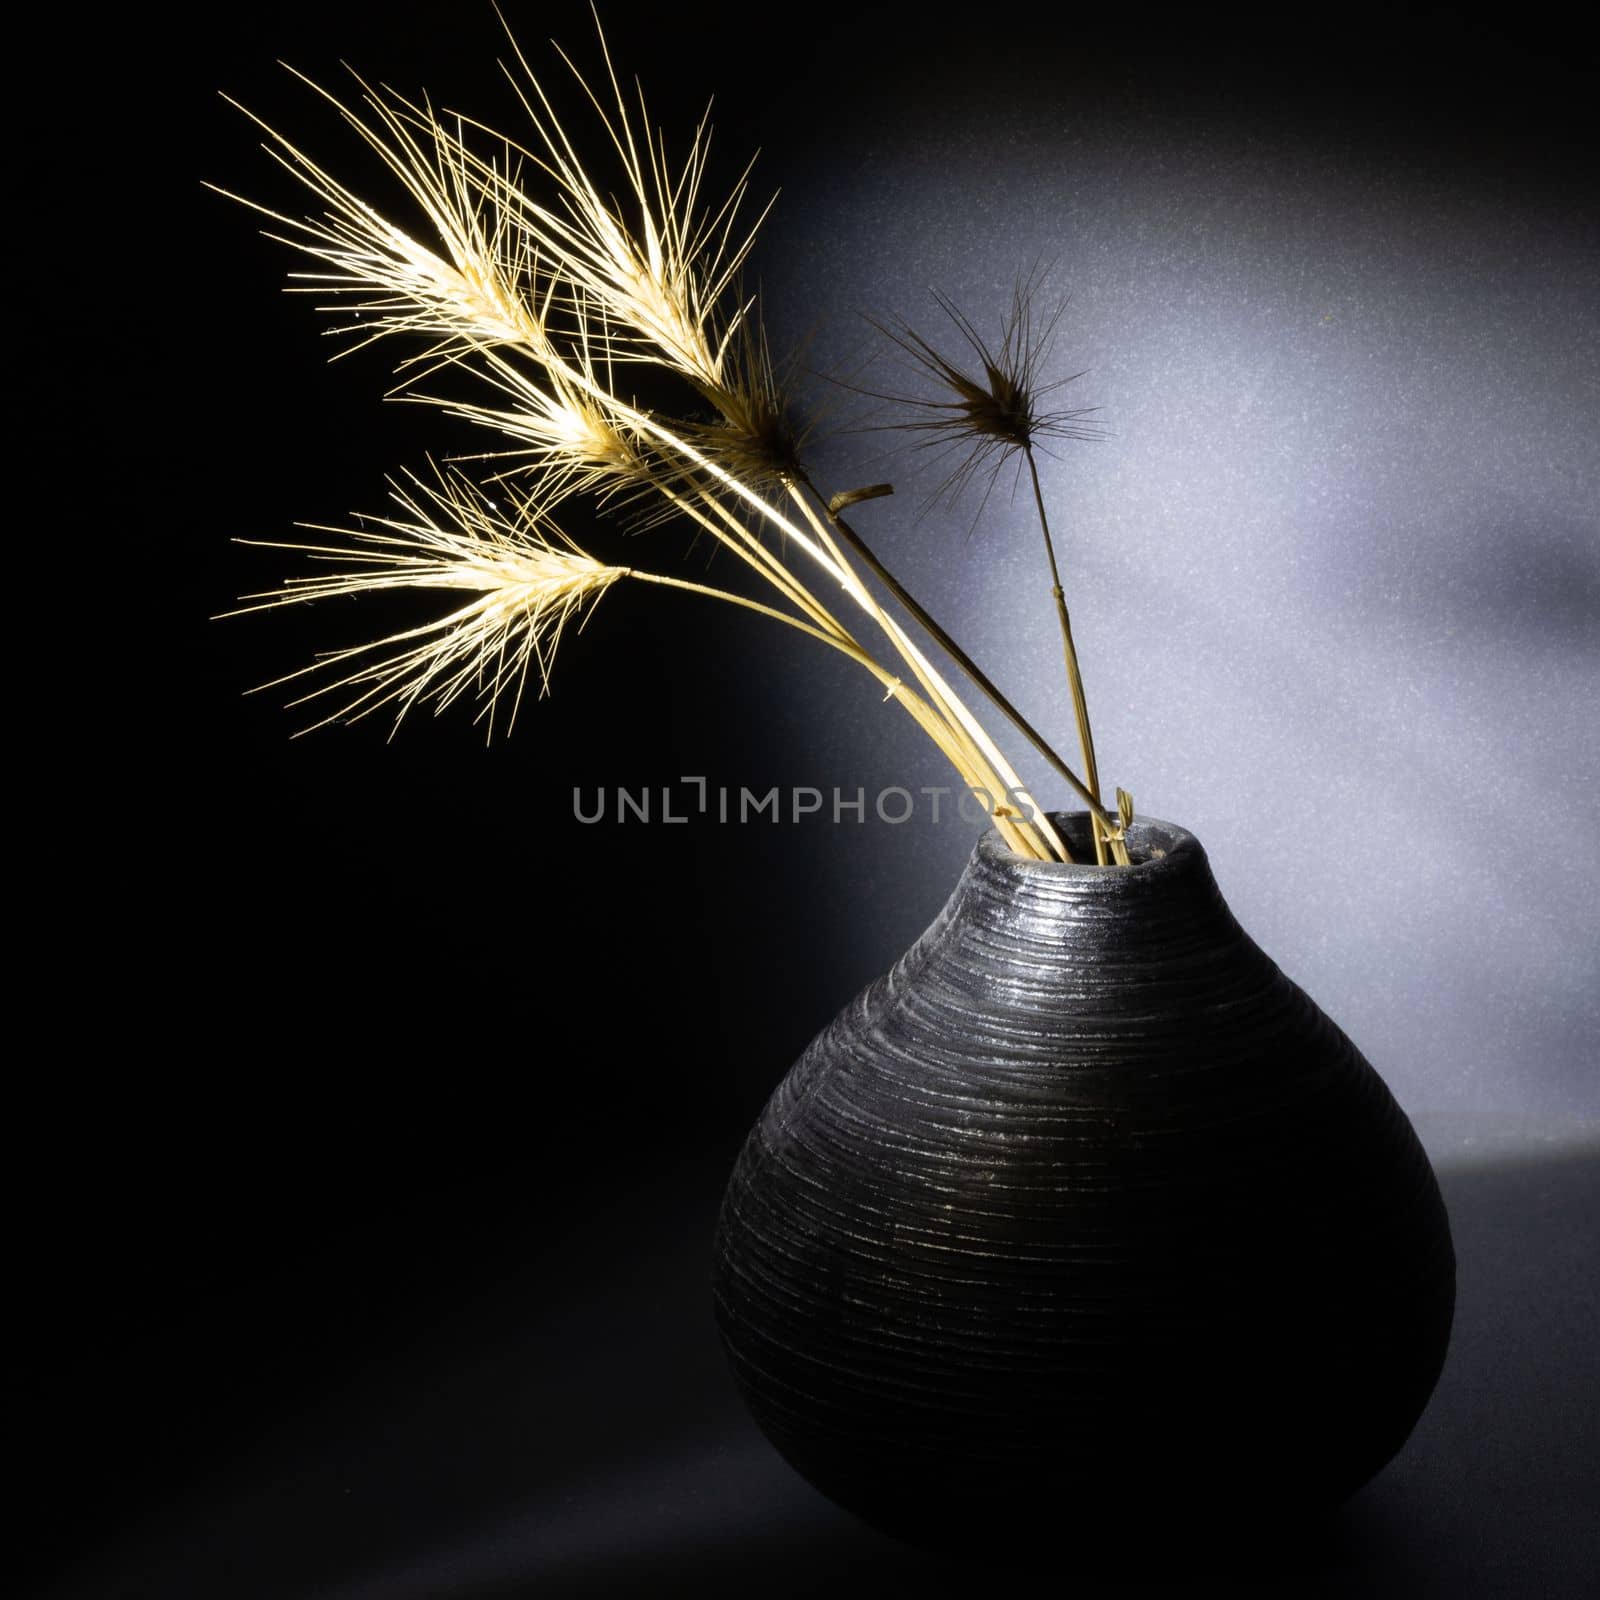 Dried spikelets in a small decorative clay vase. Dark background, rays of light fall on the spikelets. Minimalist still life. Light brush, close-up